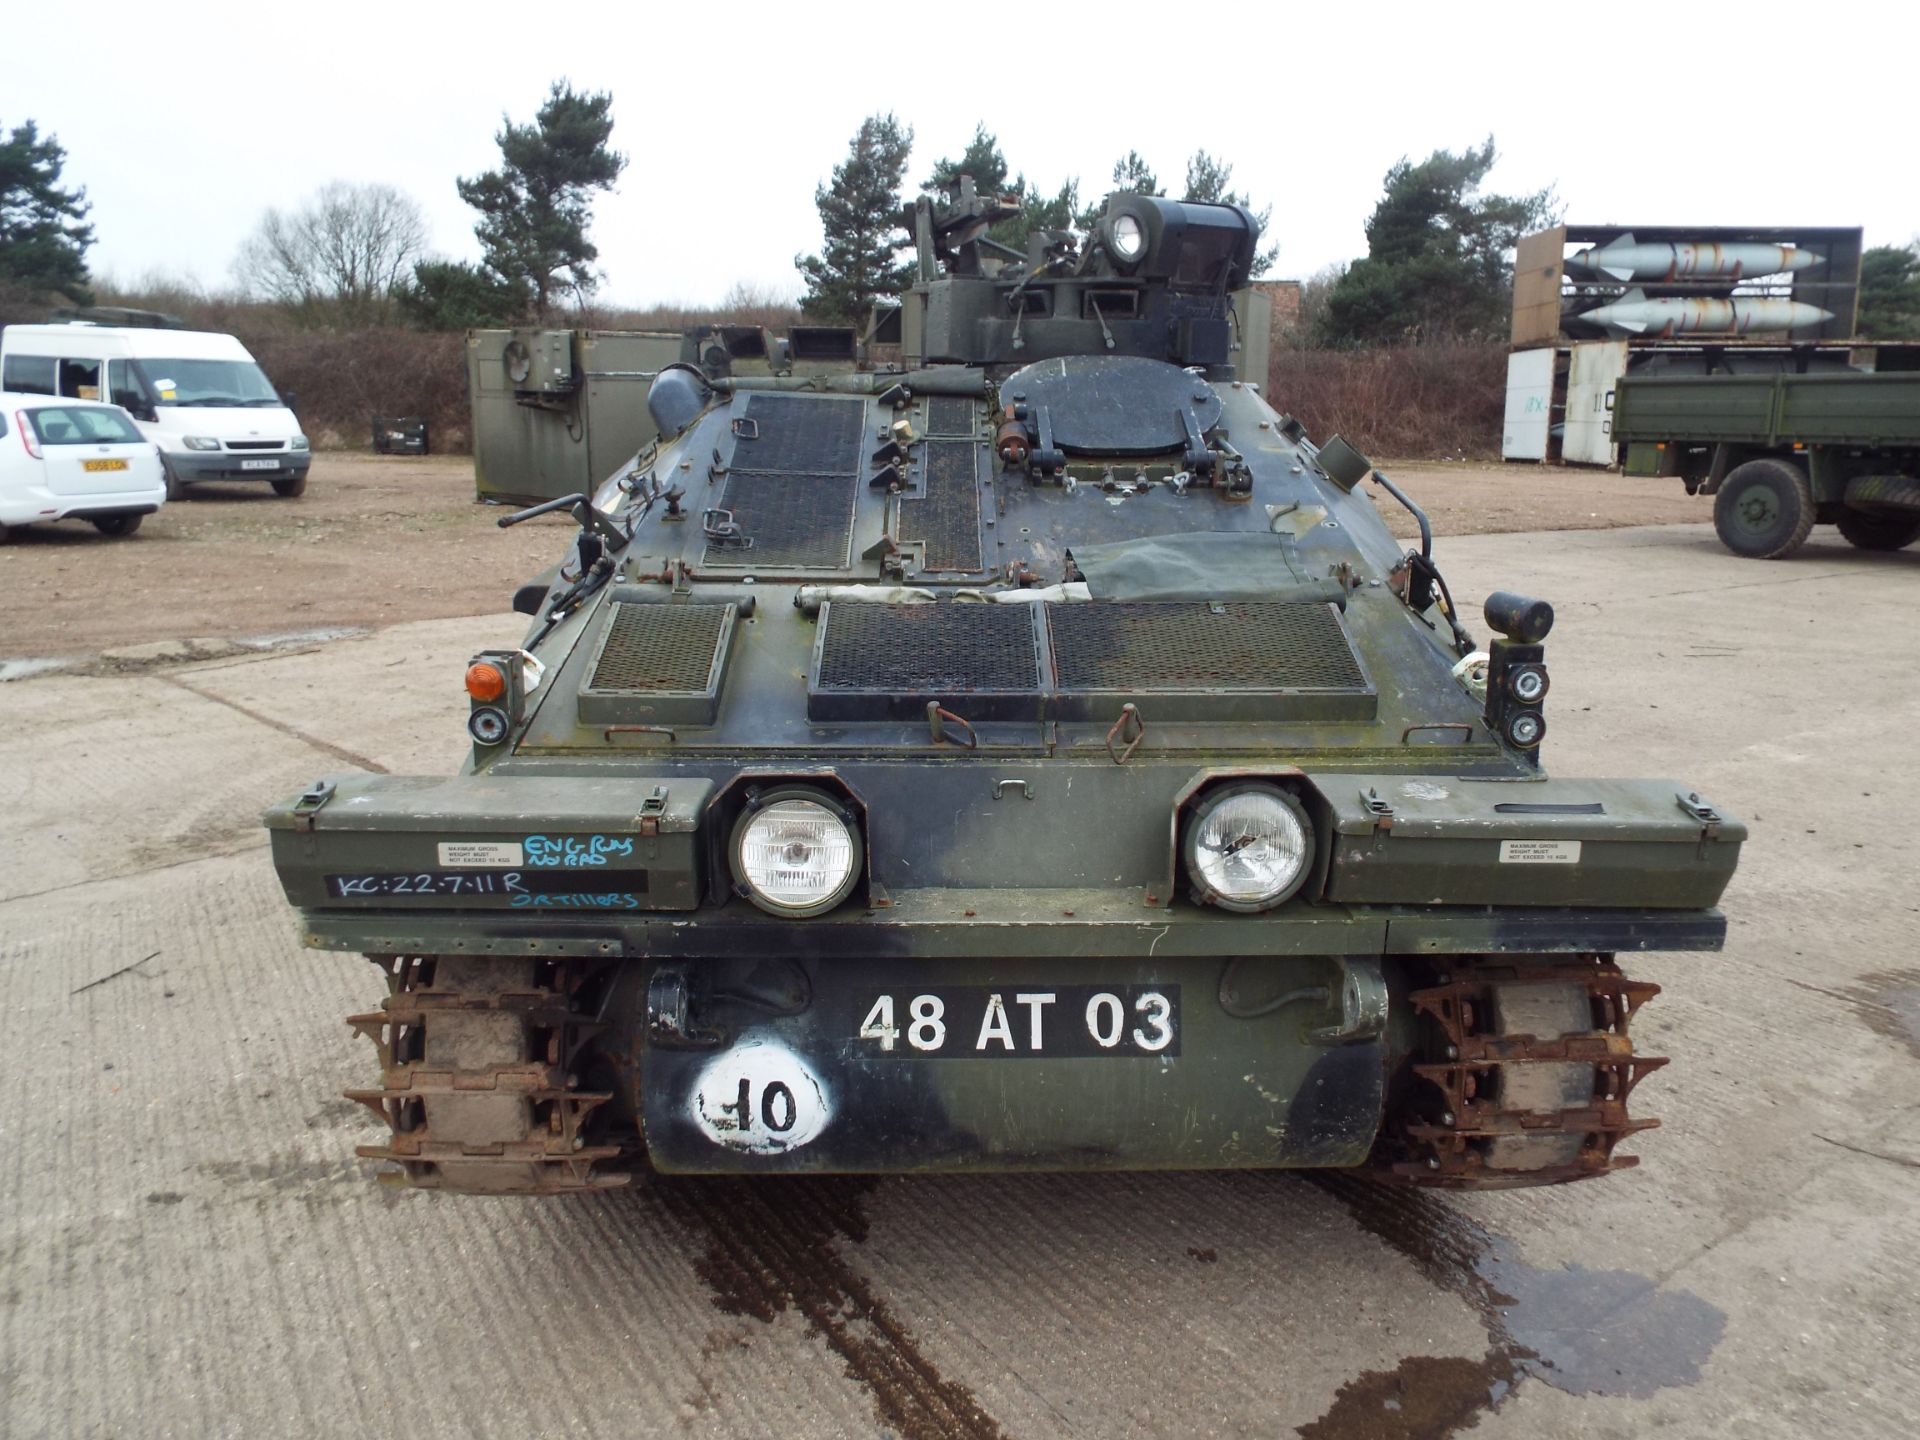 Dieselised CVRT (Combat Vehicle Reconnaissance Tracked) Spartan Armoured Personnel Carrier - Image 2 of 28